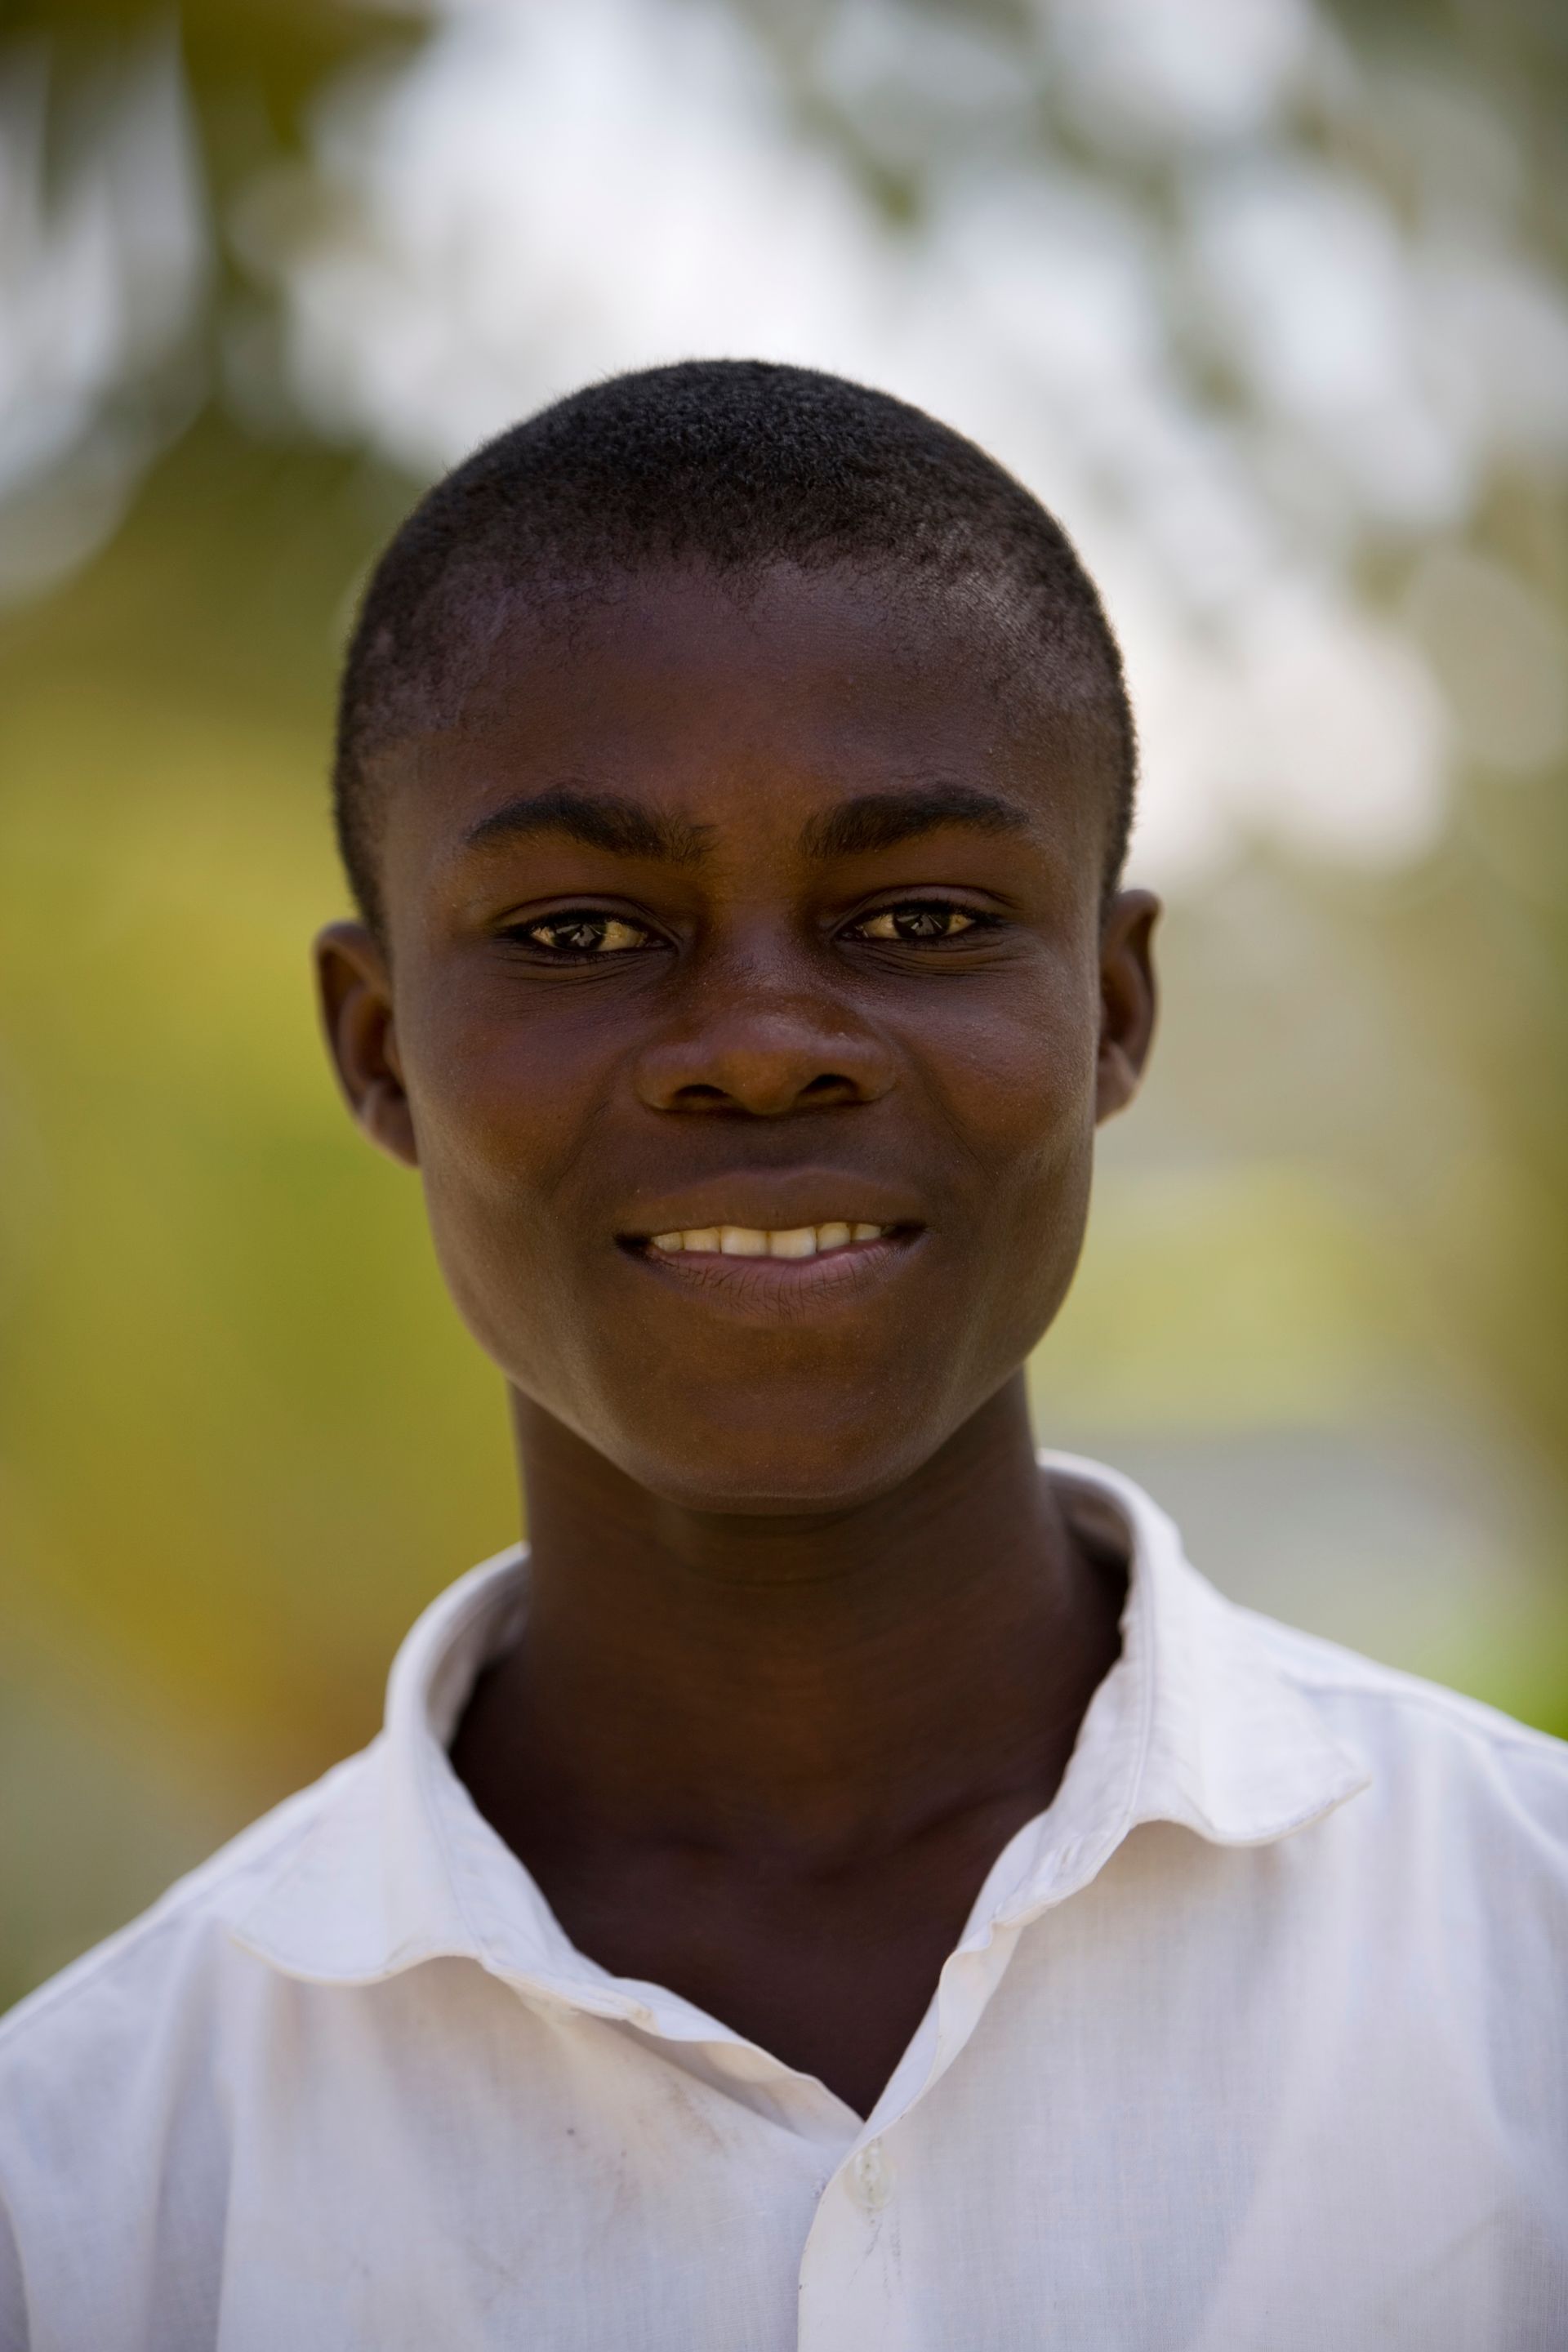 A portrait of a young man from Africa.